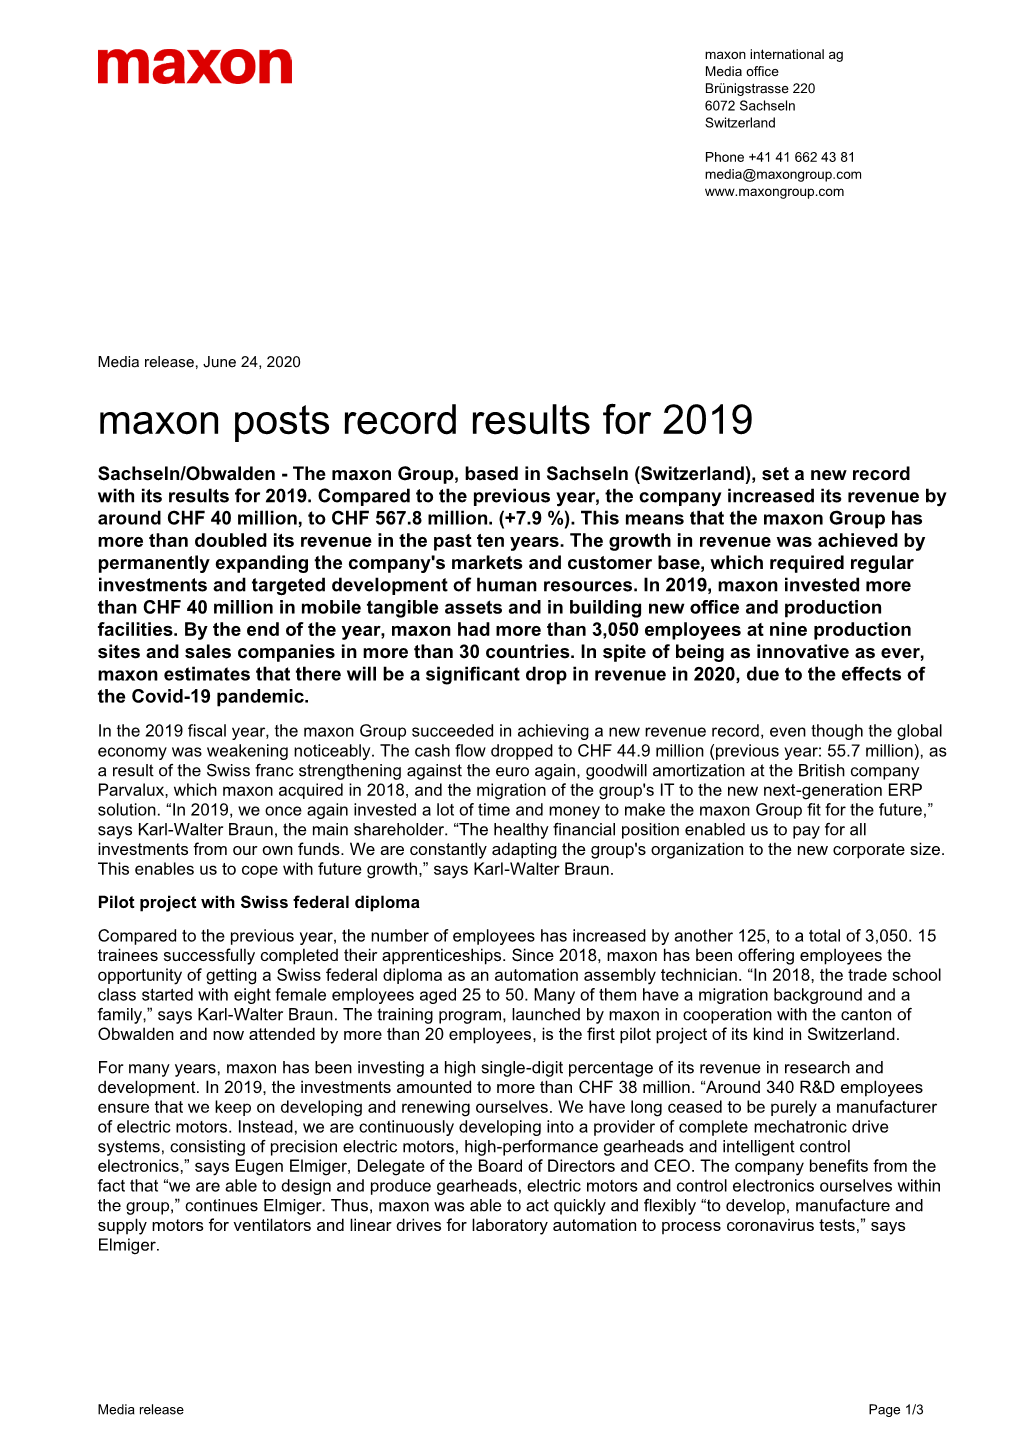 Maxon Posts Record Results for 2019